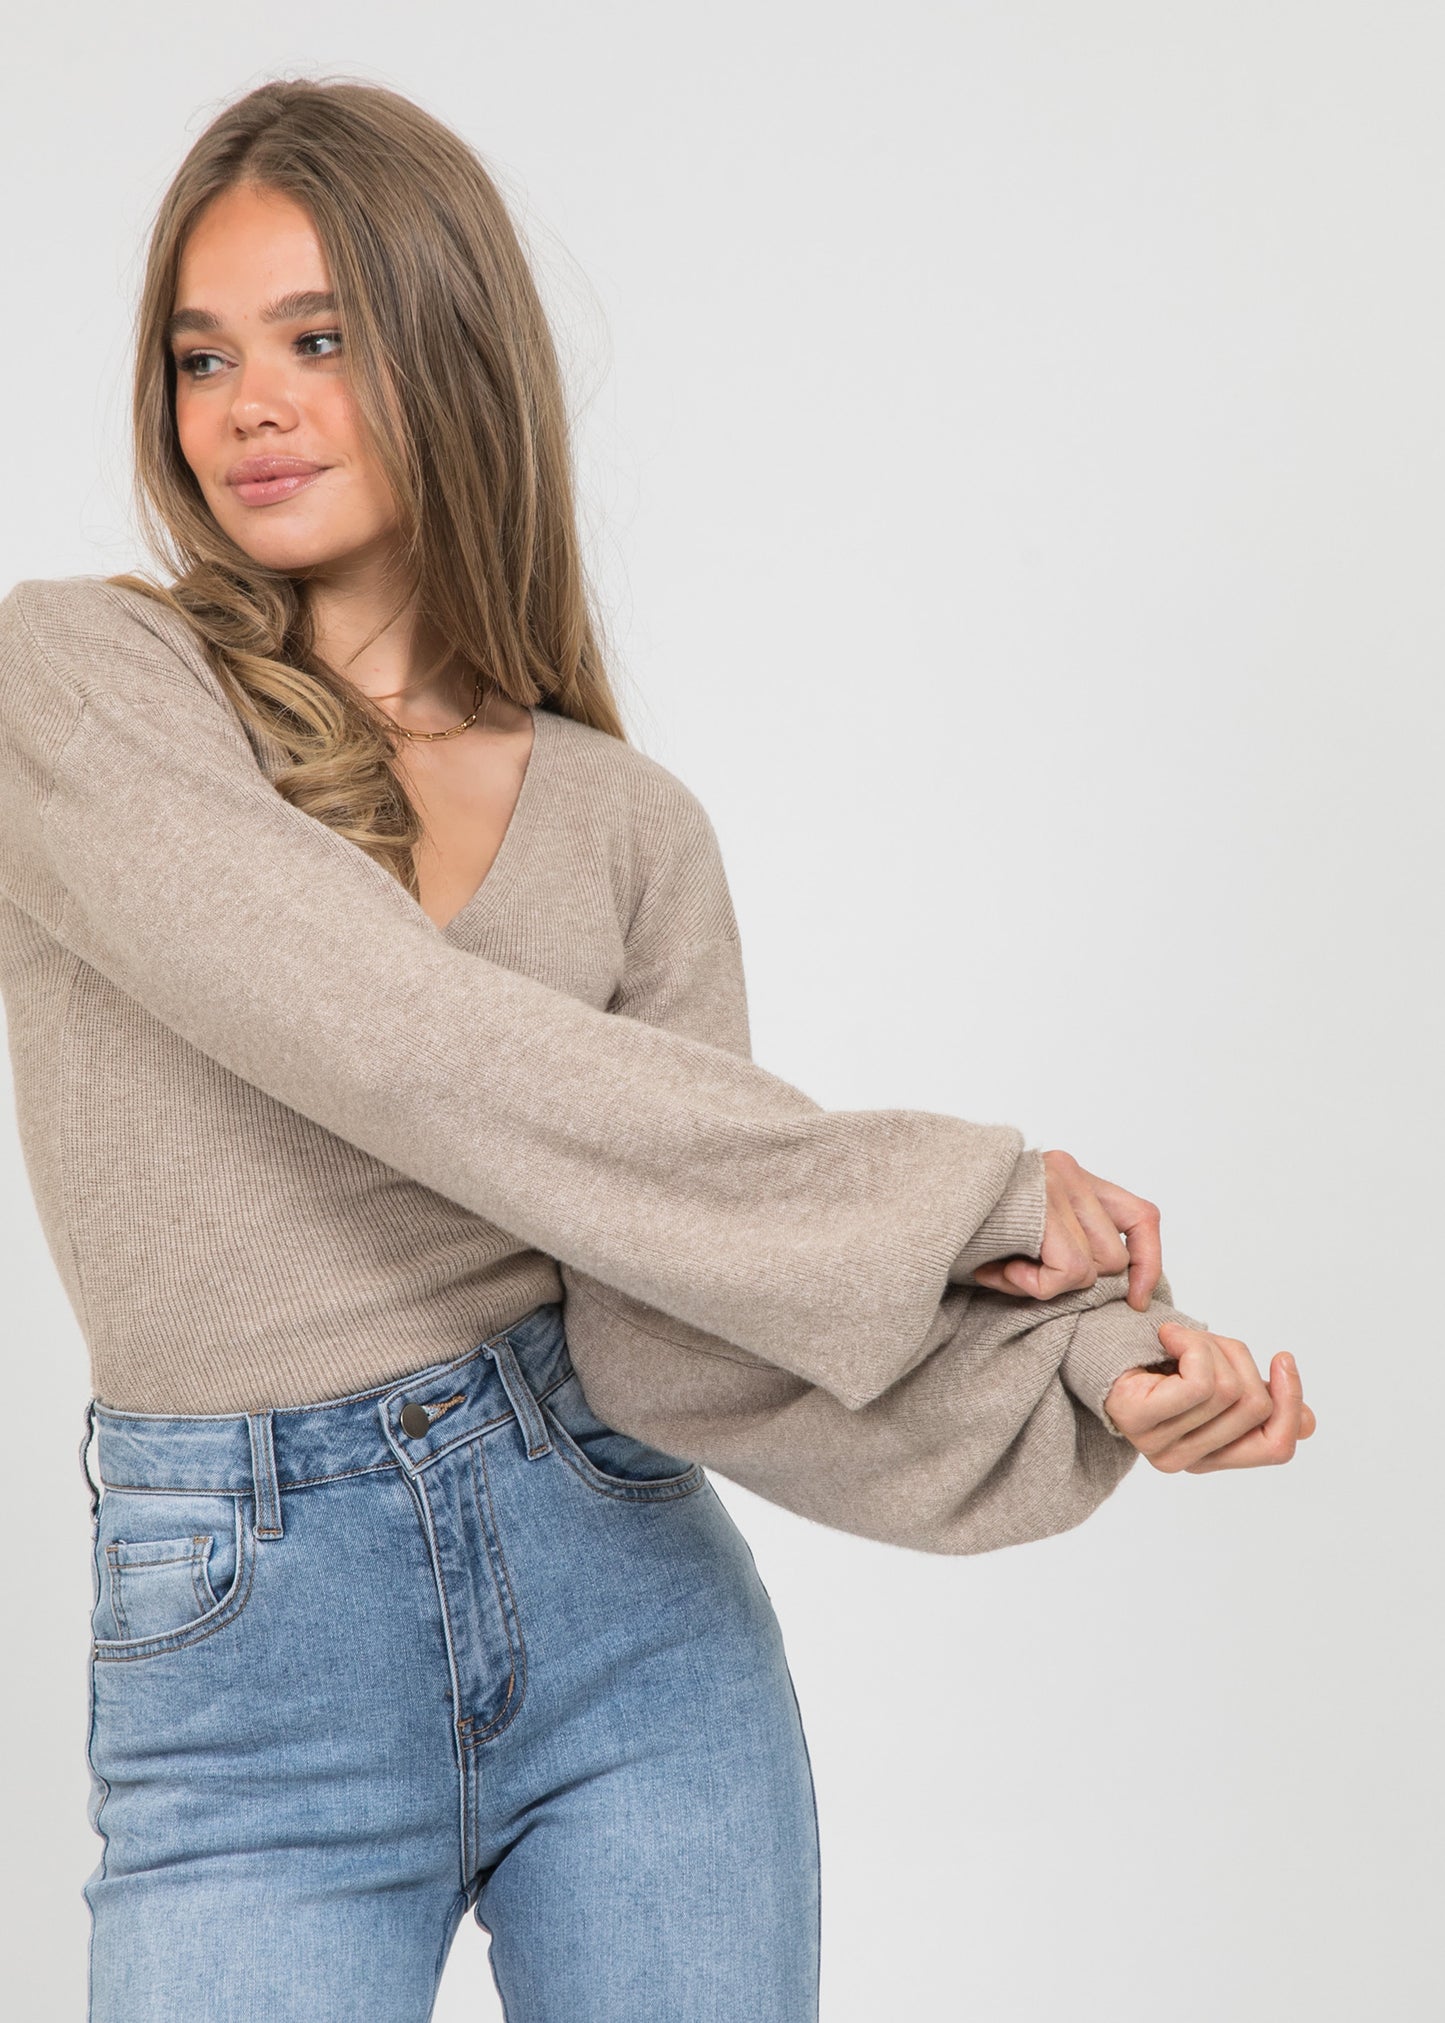 Wrap knitted jumper with ballon sleeves in taupe